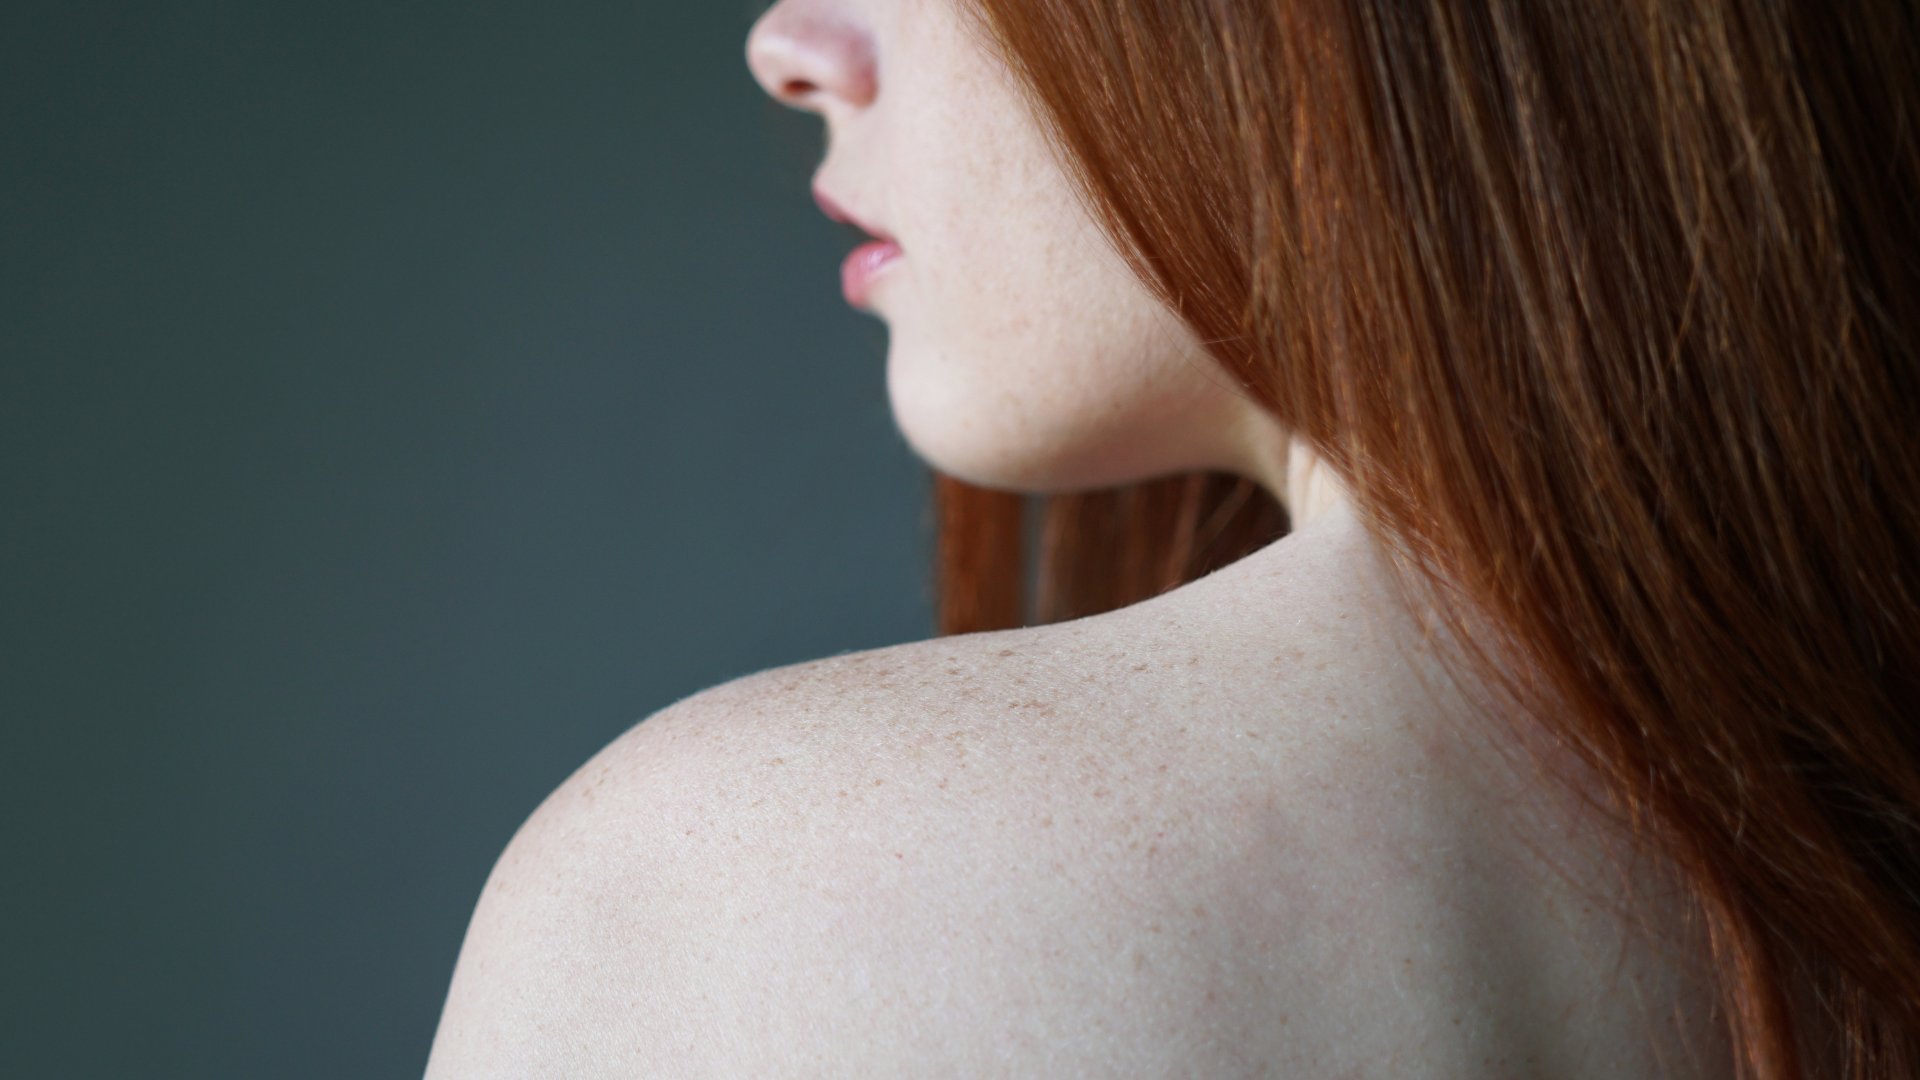 Where Do Redheads Fall on the Fitzpatrick Skin Type Scale?